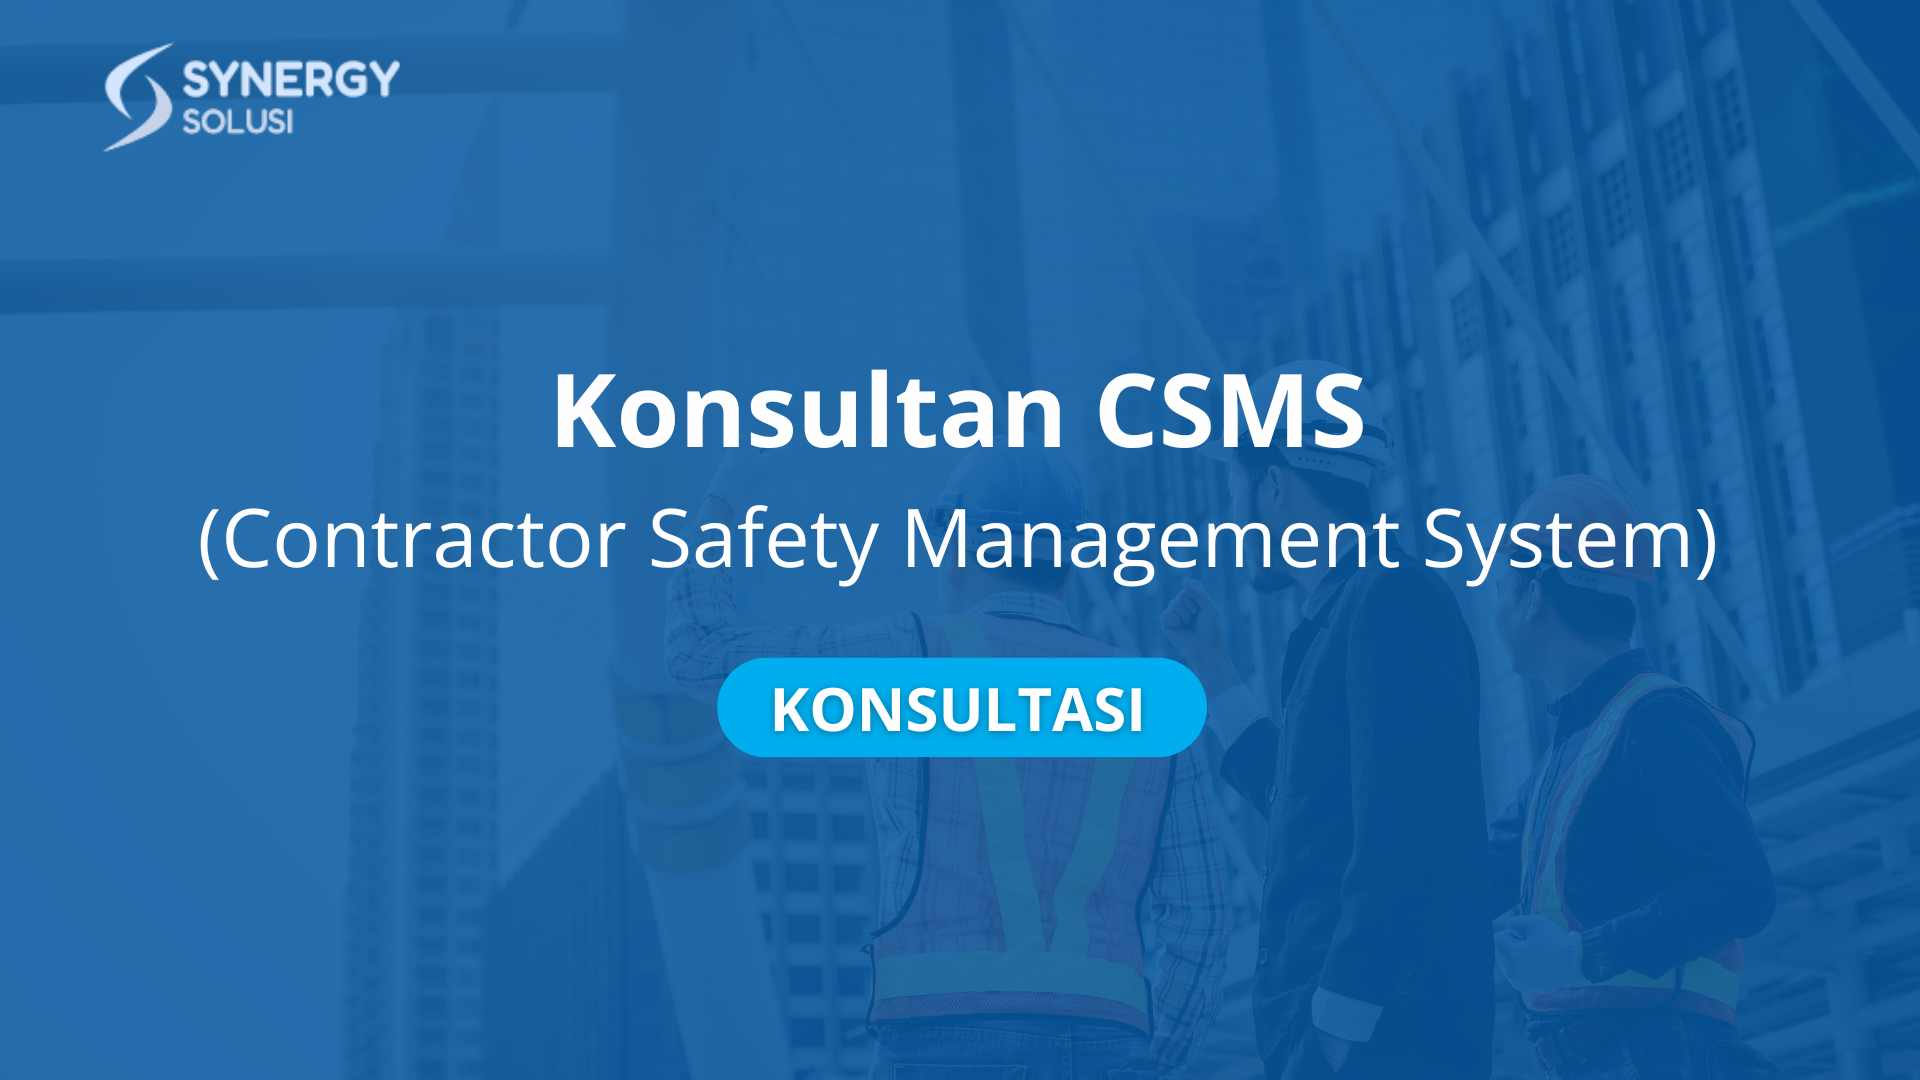 Konsultan CSMS (Contractor Safety Management System) Terbaru